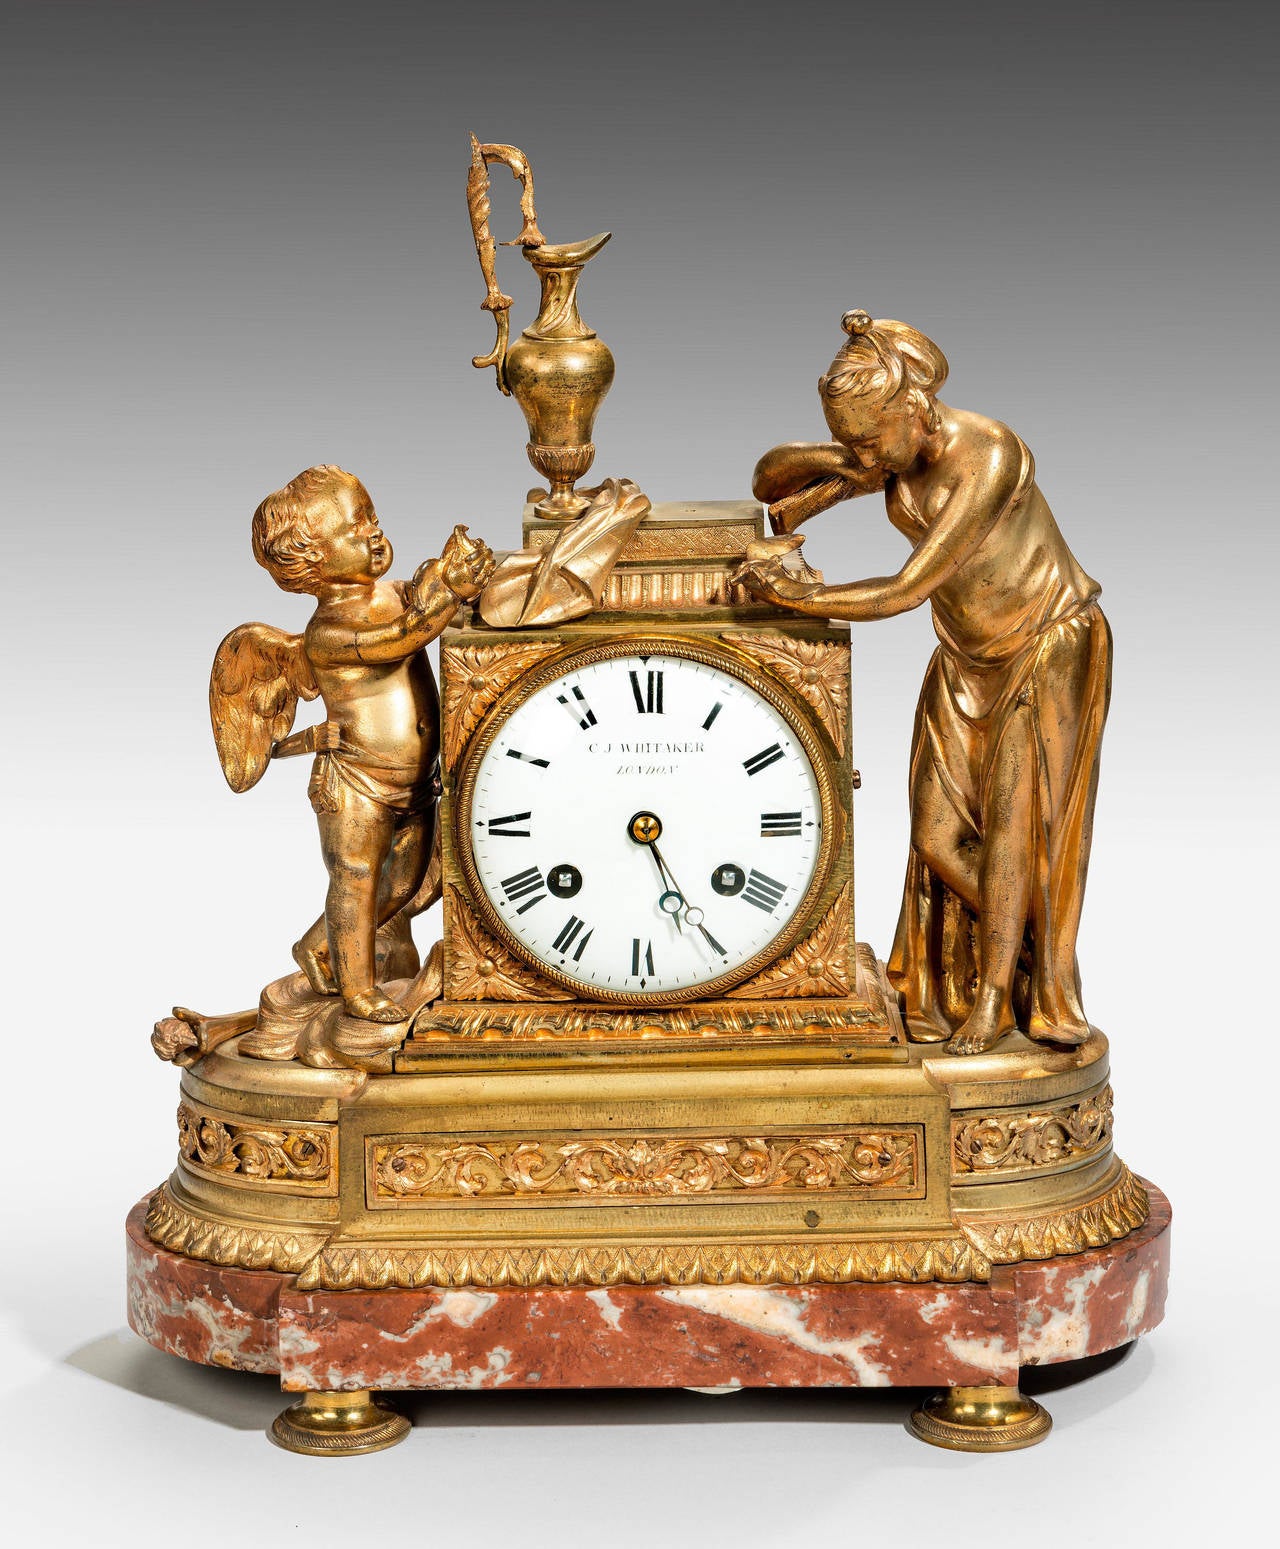 A good Louis XVI period gilt bronze mantel clock retailed in London by C J Whittaker, signed on the dial. Two figures supporting the central mechanism, with a dark gold and white moulted and marble base.